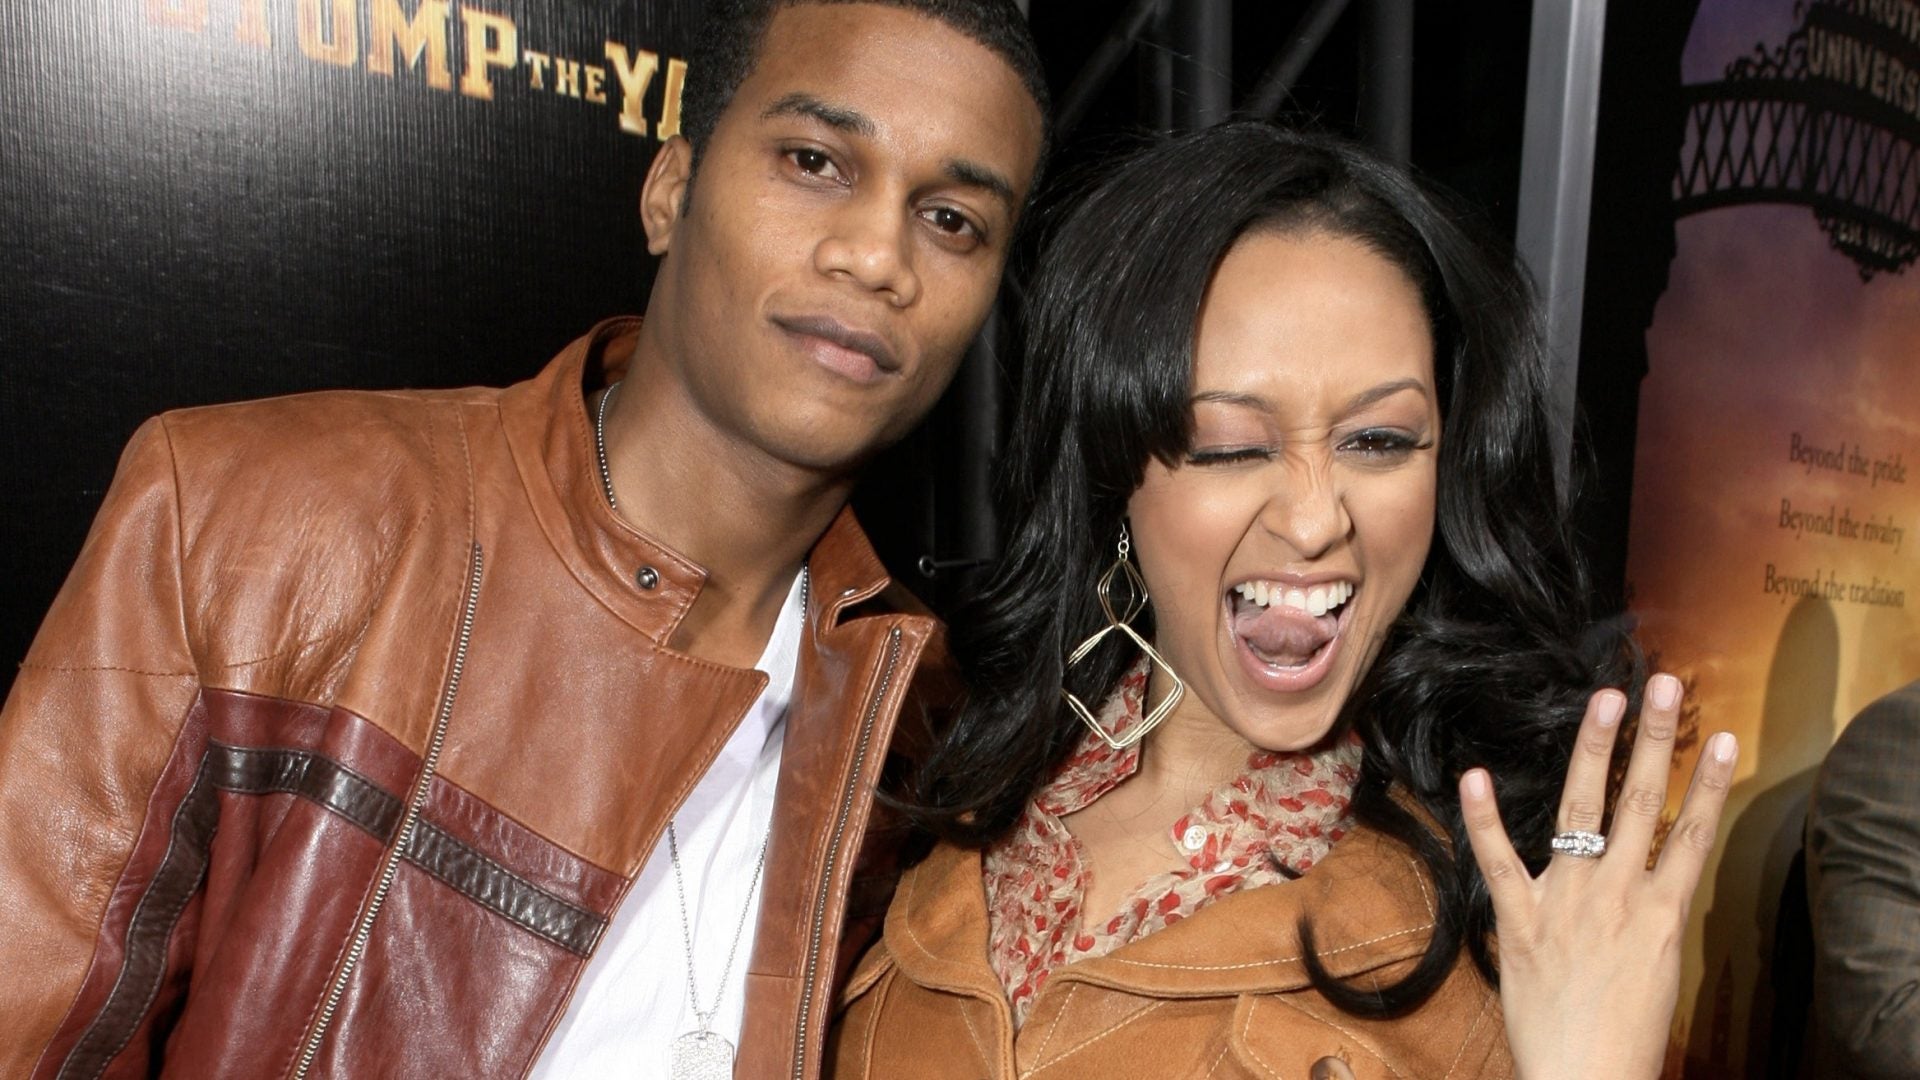 Then and Now: Tia Mowry and Husband Cory Hardrict's Love Through The Years